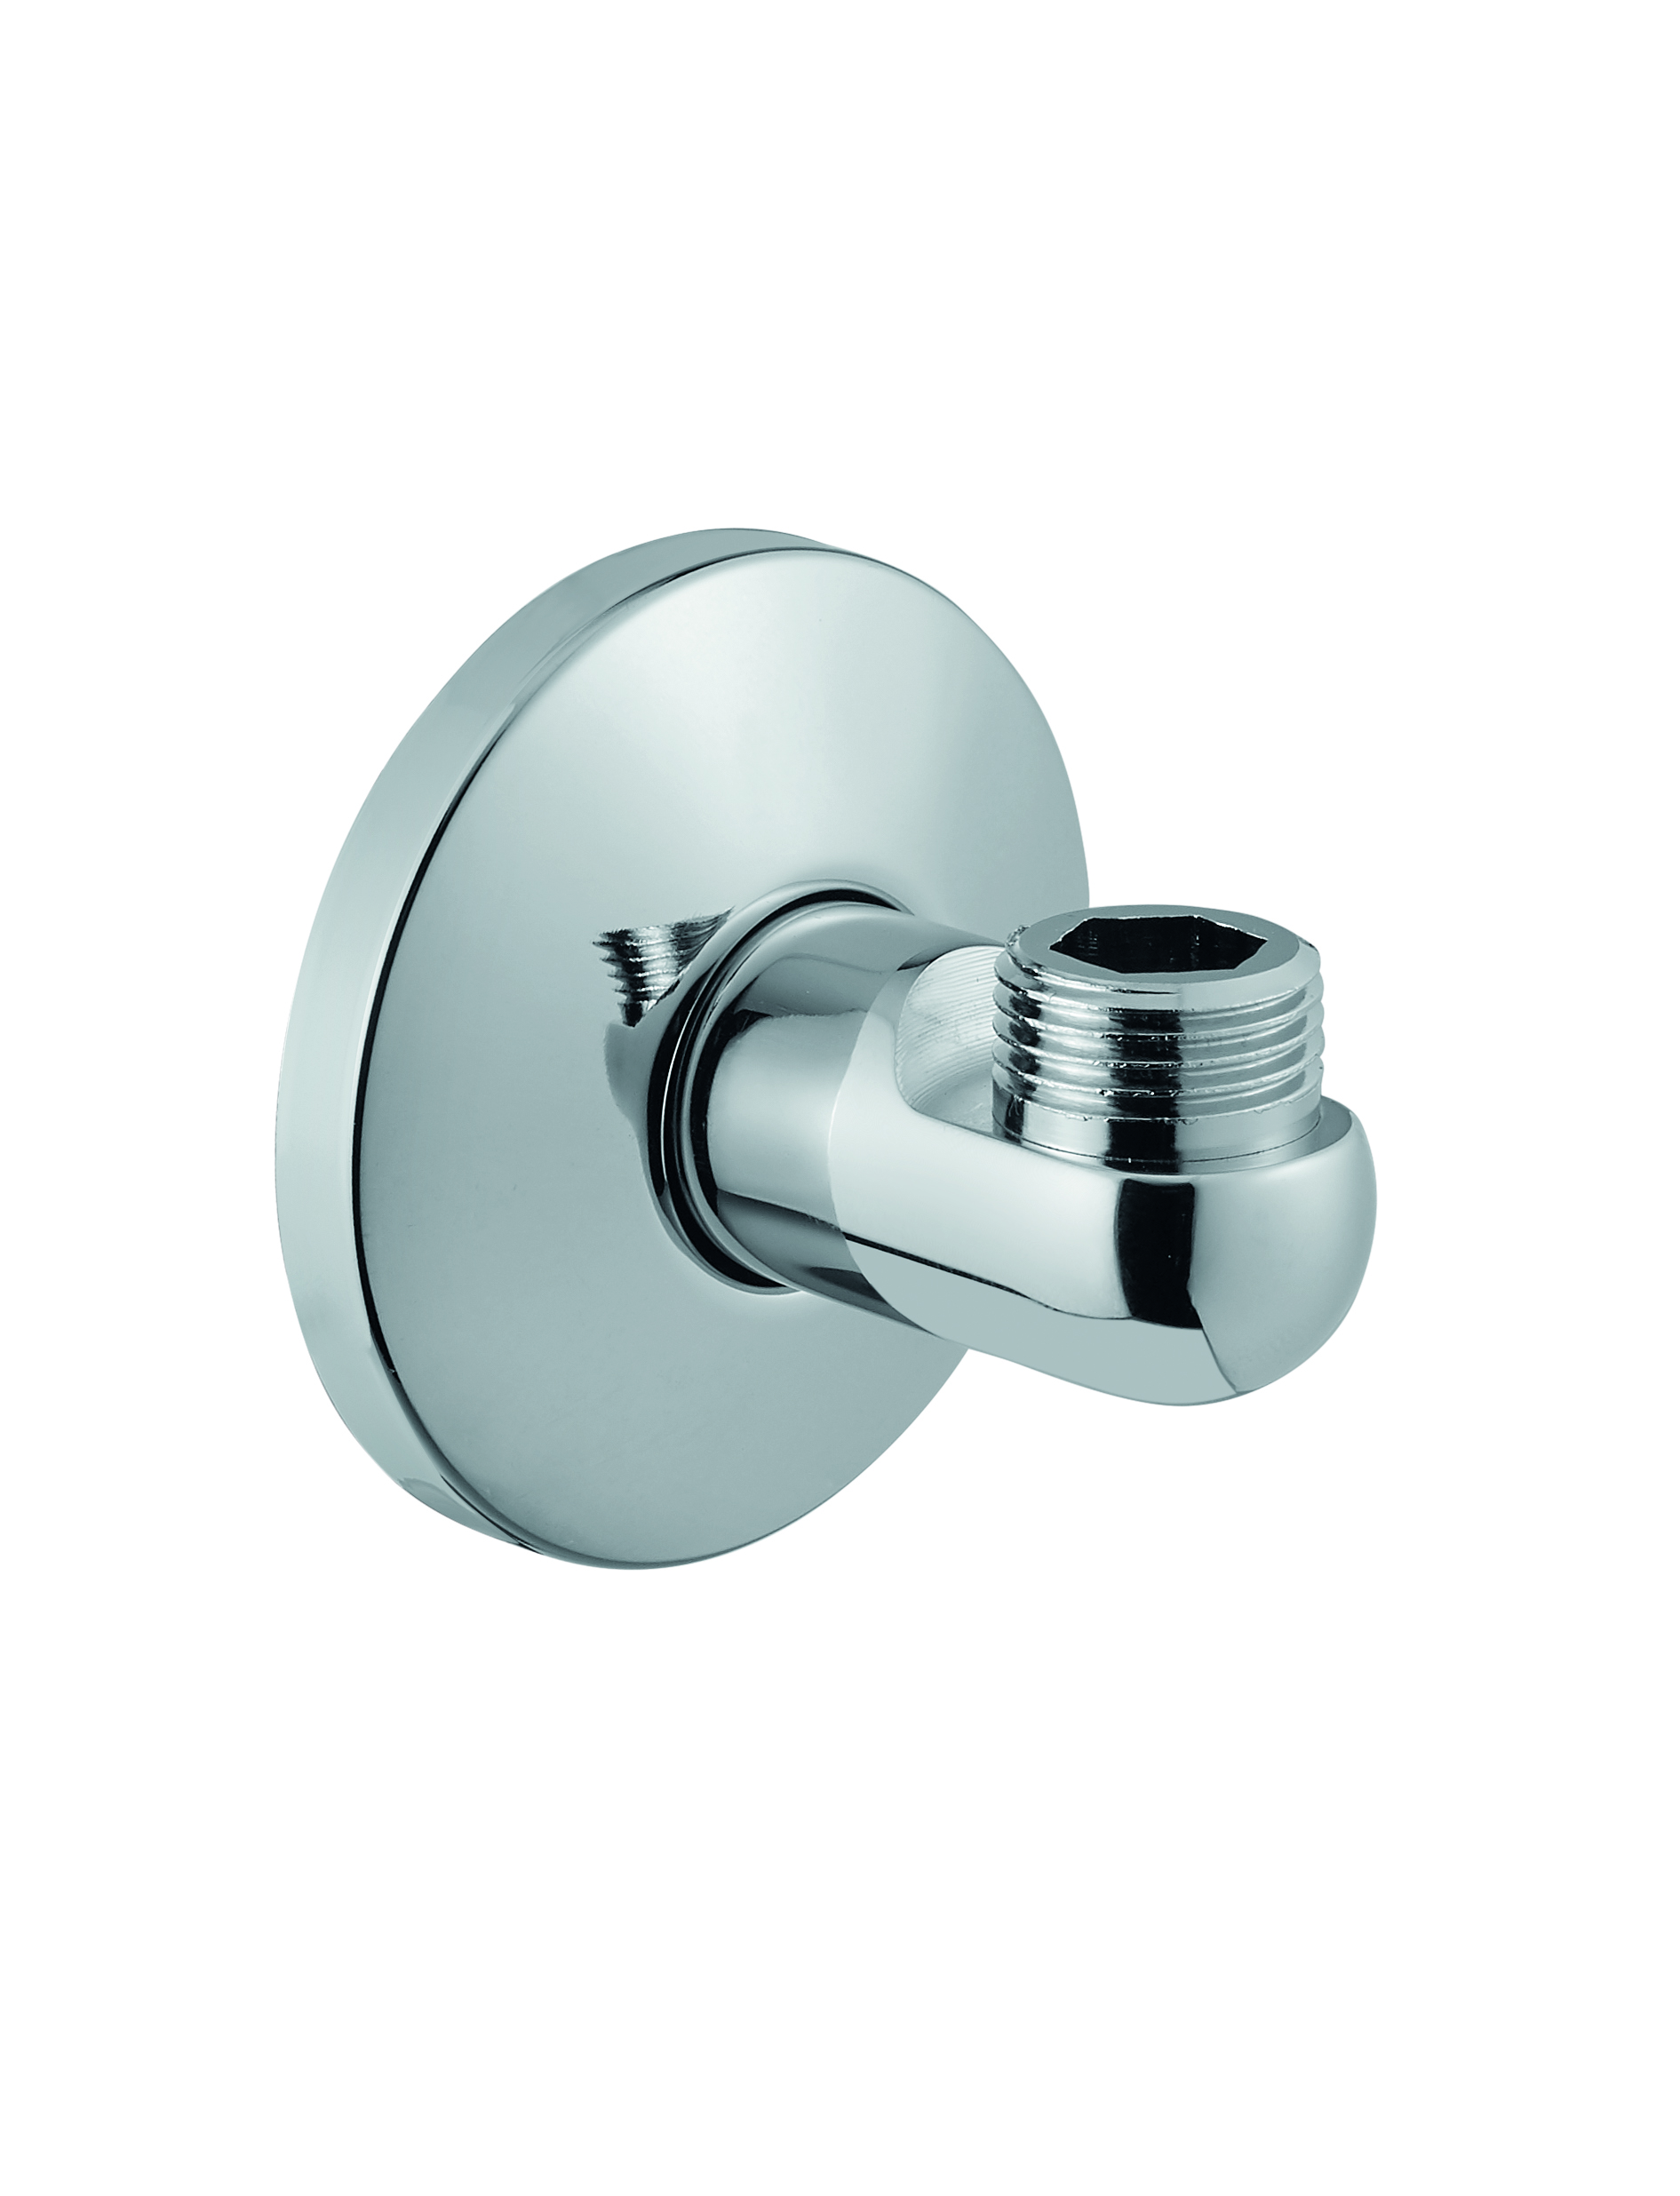 CHROME-PLATED BRASS WATER INTAKE FOR WALL MOUNTING